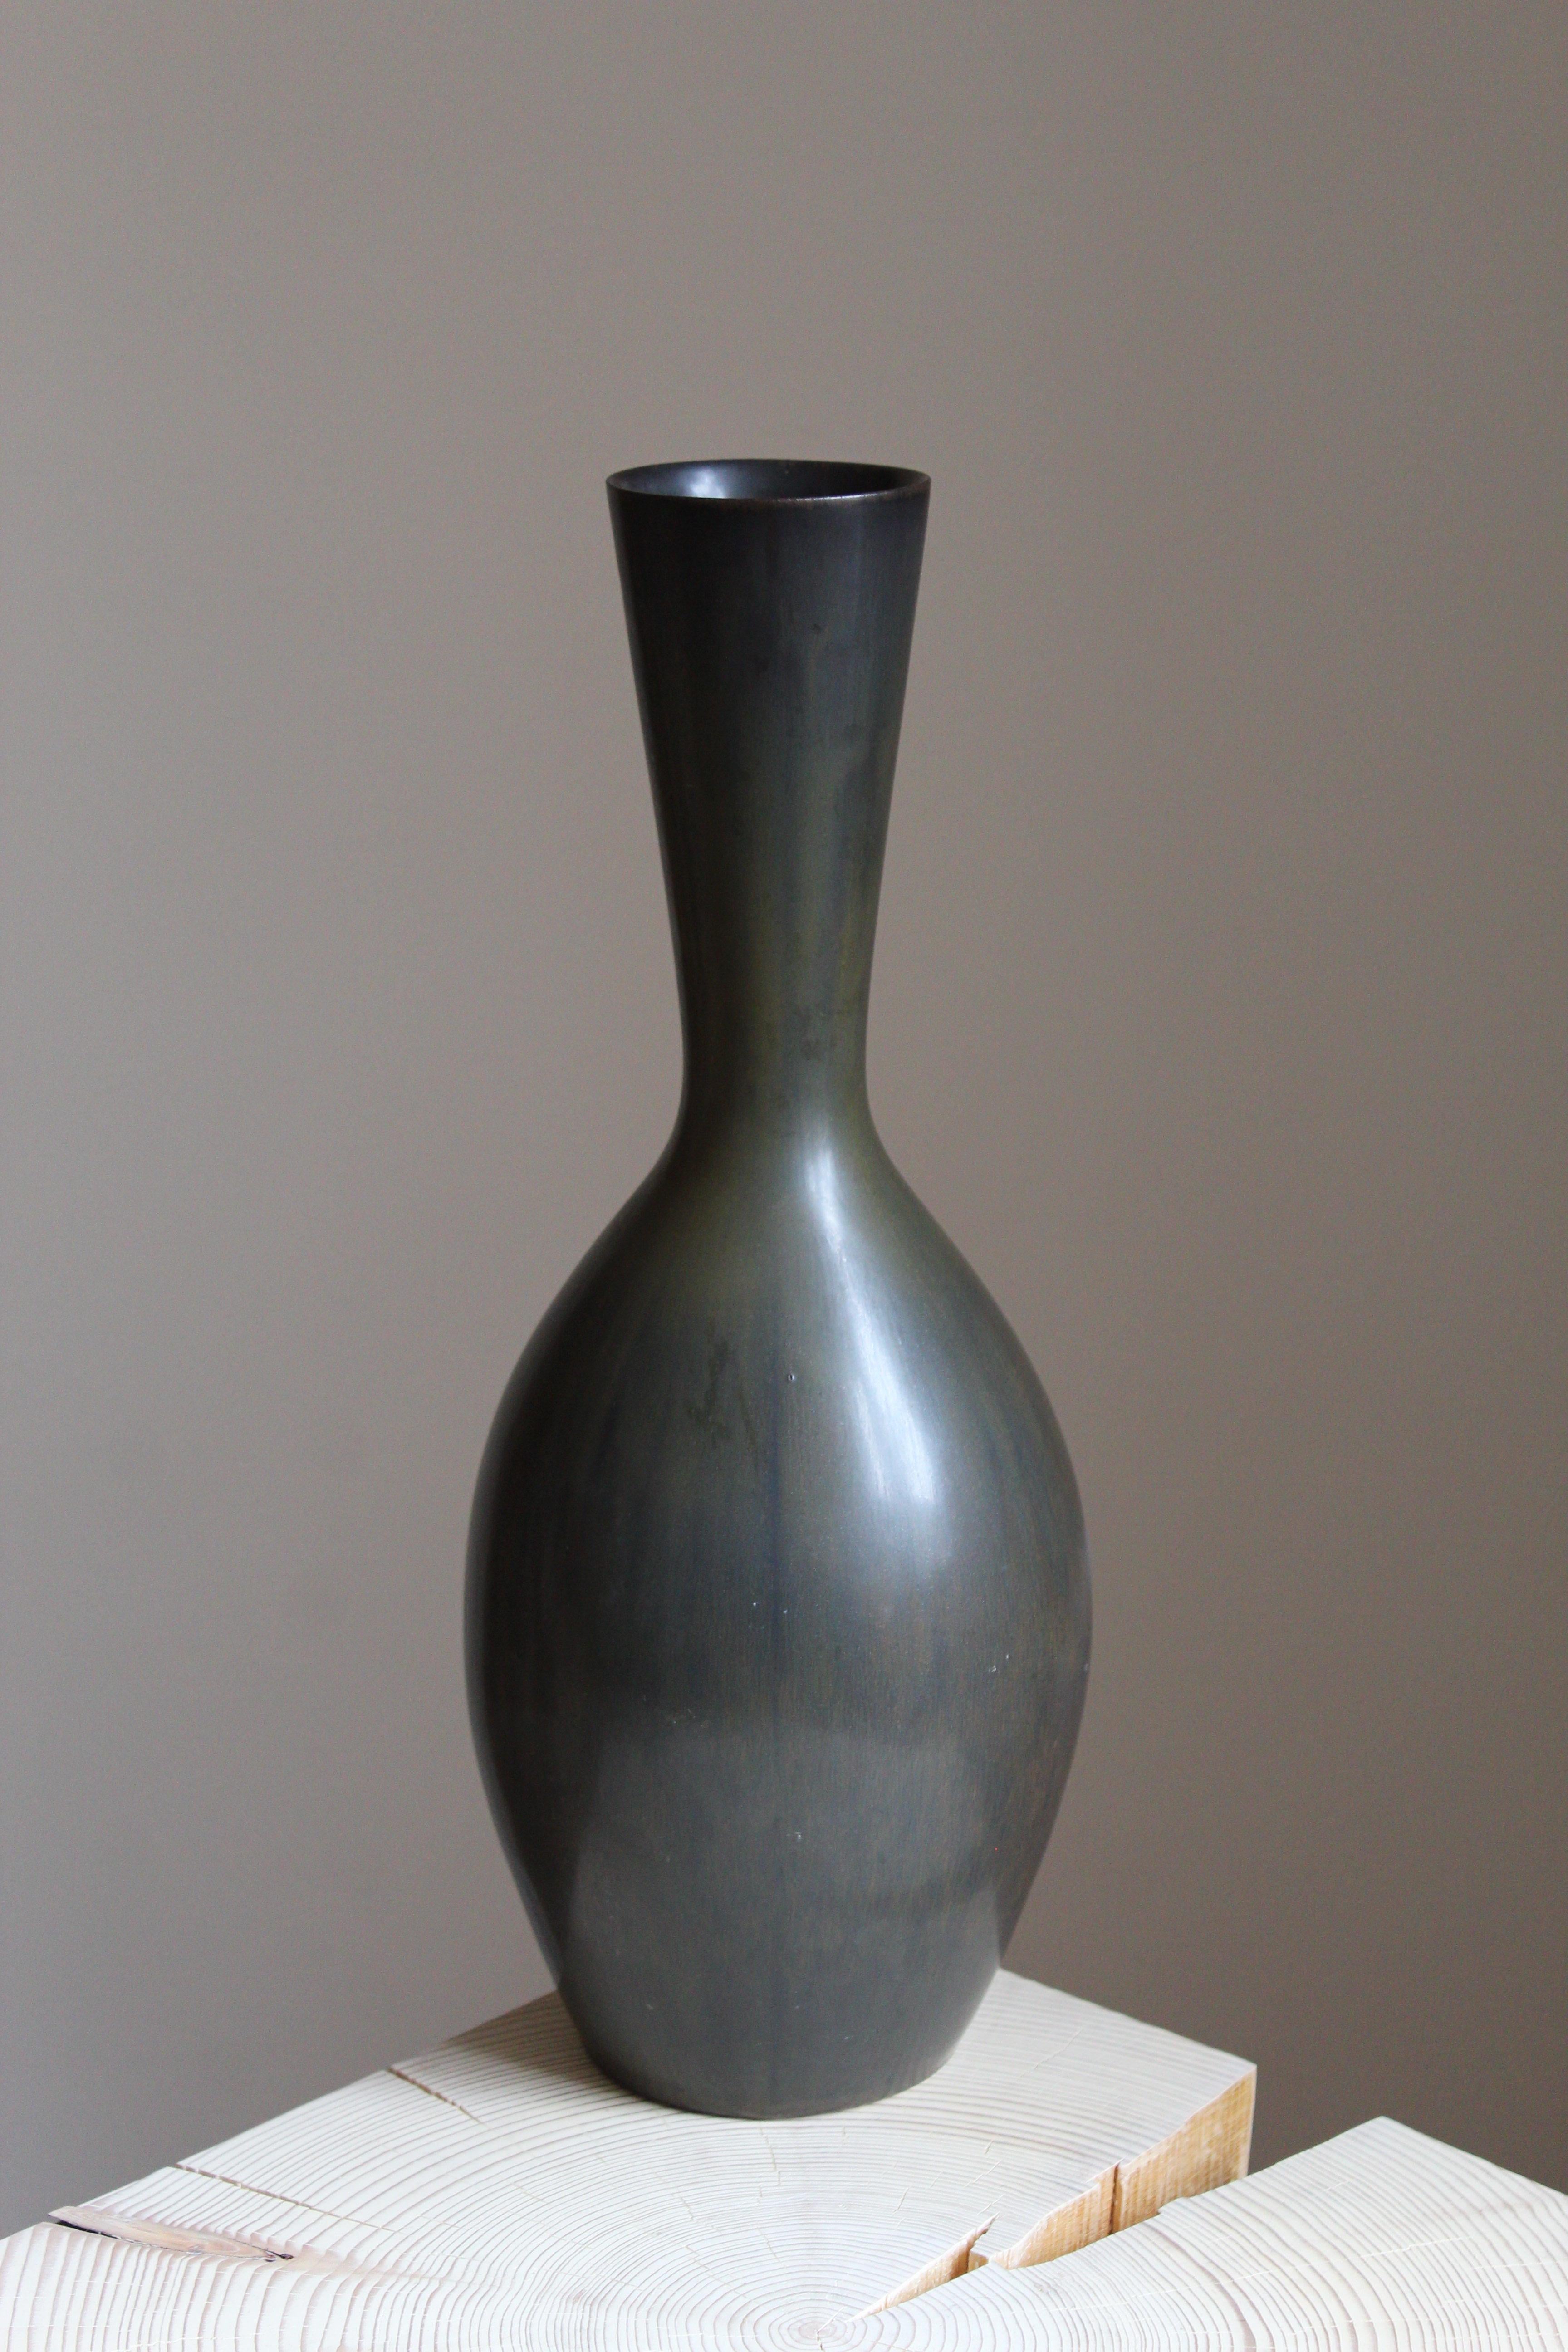 A rare and sizable vase / vessel by Carl-Harry Stålhane for Swedish firm Rörstrand, 1950s, Sweden. Marked and signed.

Other ceramicists of the period include Berndt Friberg, Axel Salto, Arne Bang and Wilhelm Kåge.